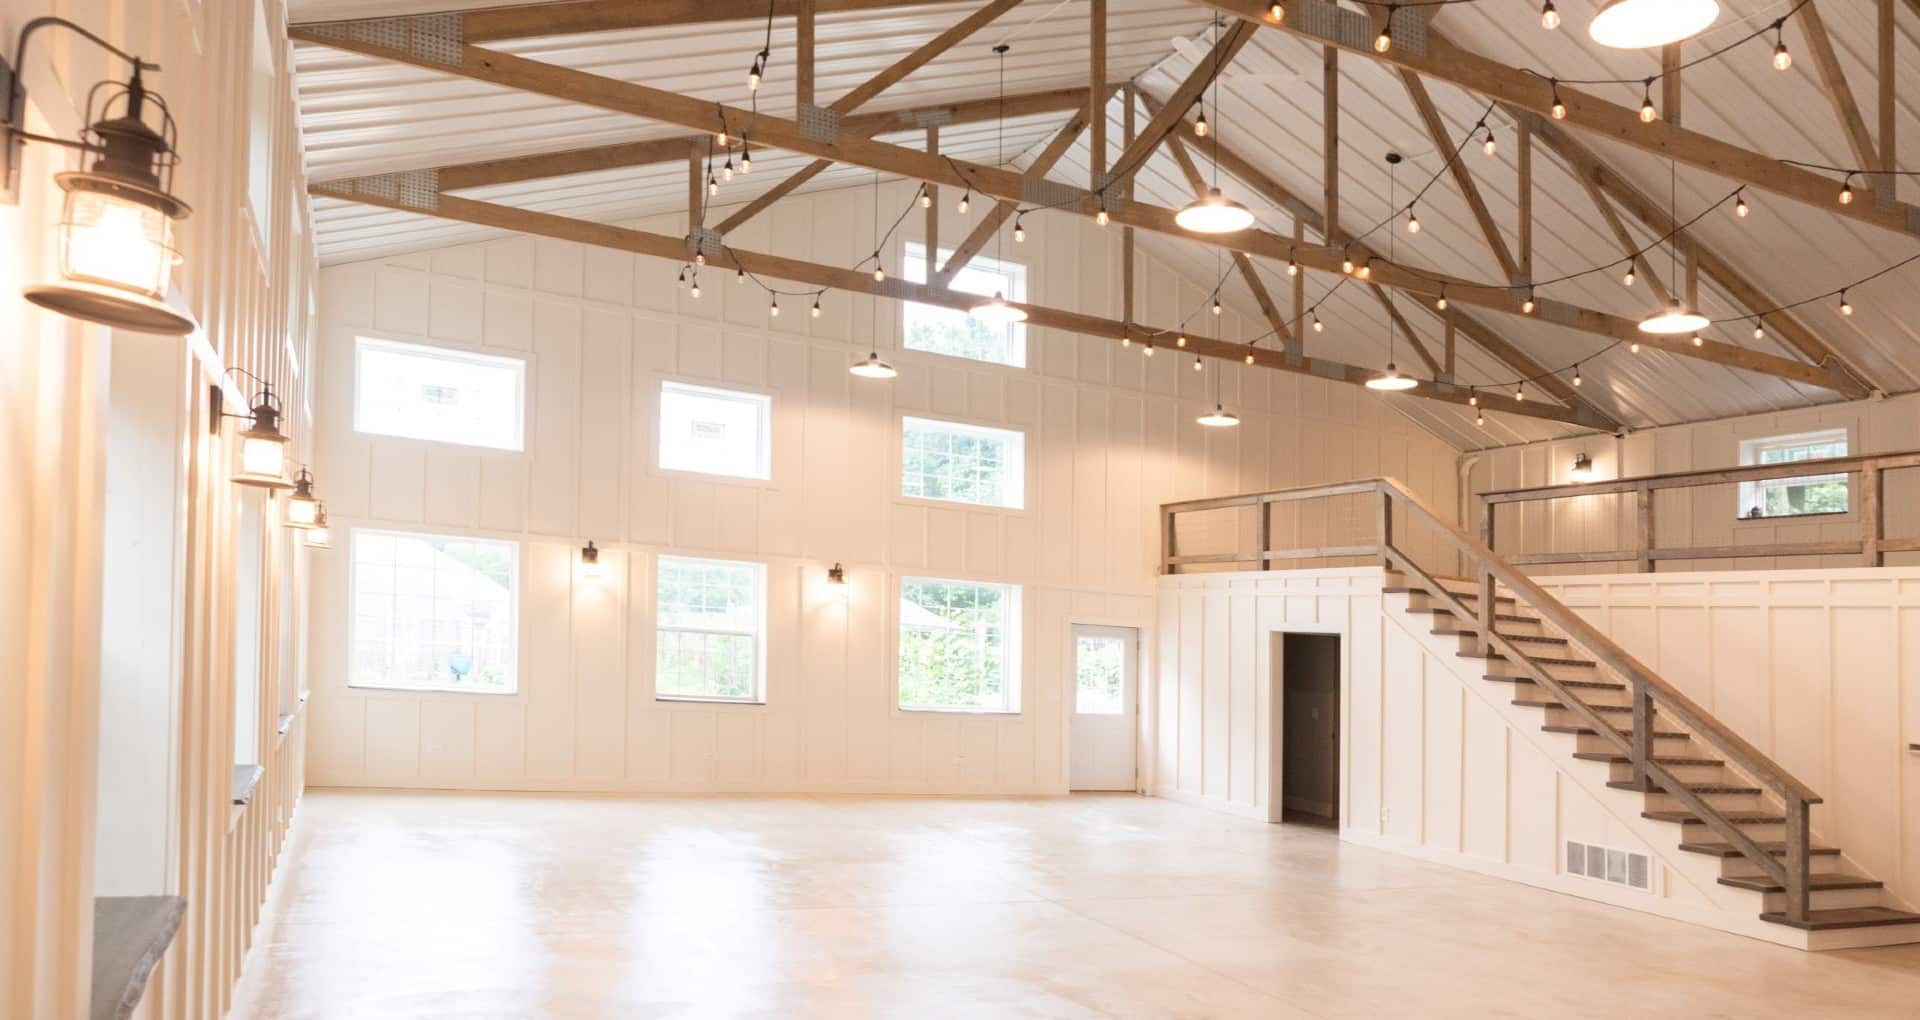 An empty large white barn with many bright windows, wood beams and string lights